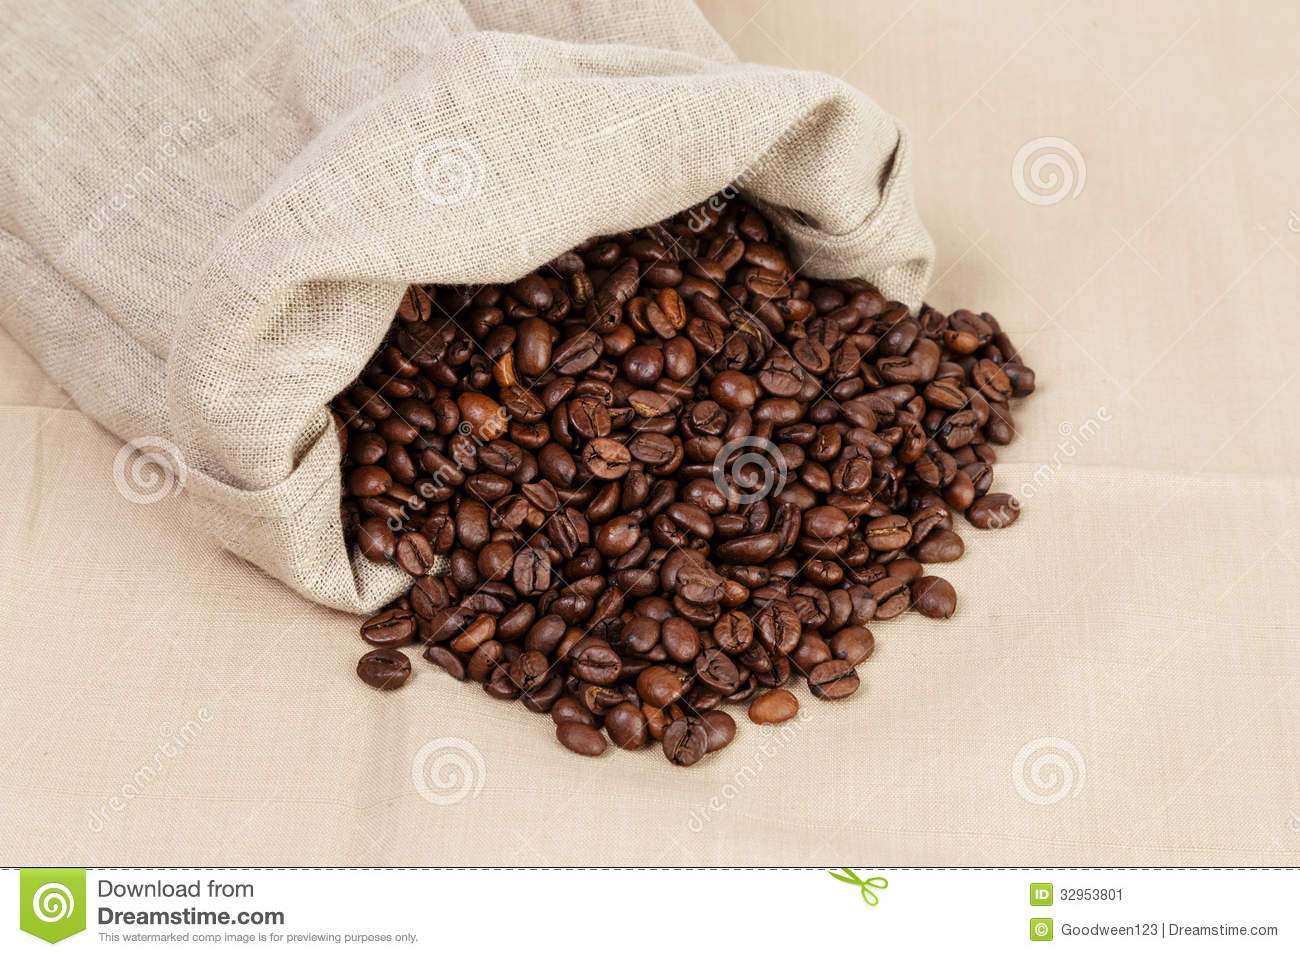 Roated Coffee Beans Spill Out Of The Bag Stock Image   Image  32953801